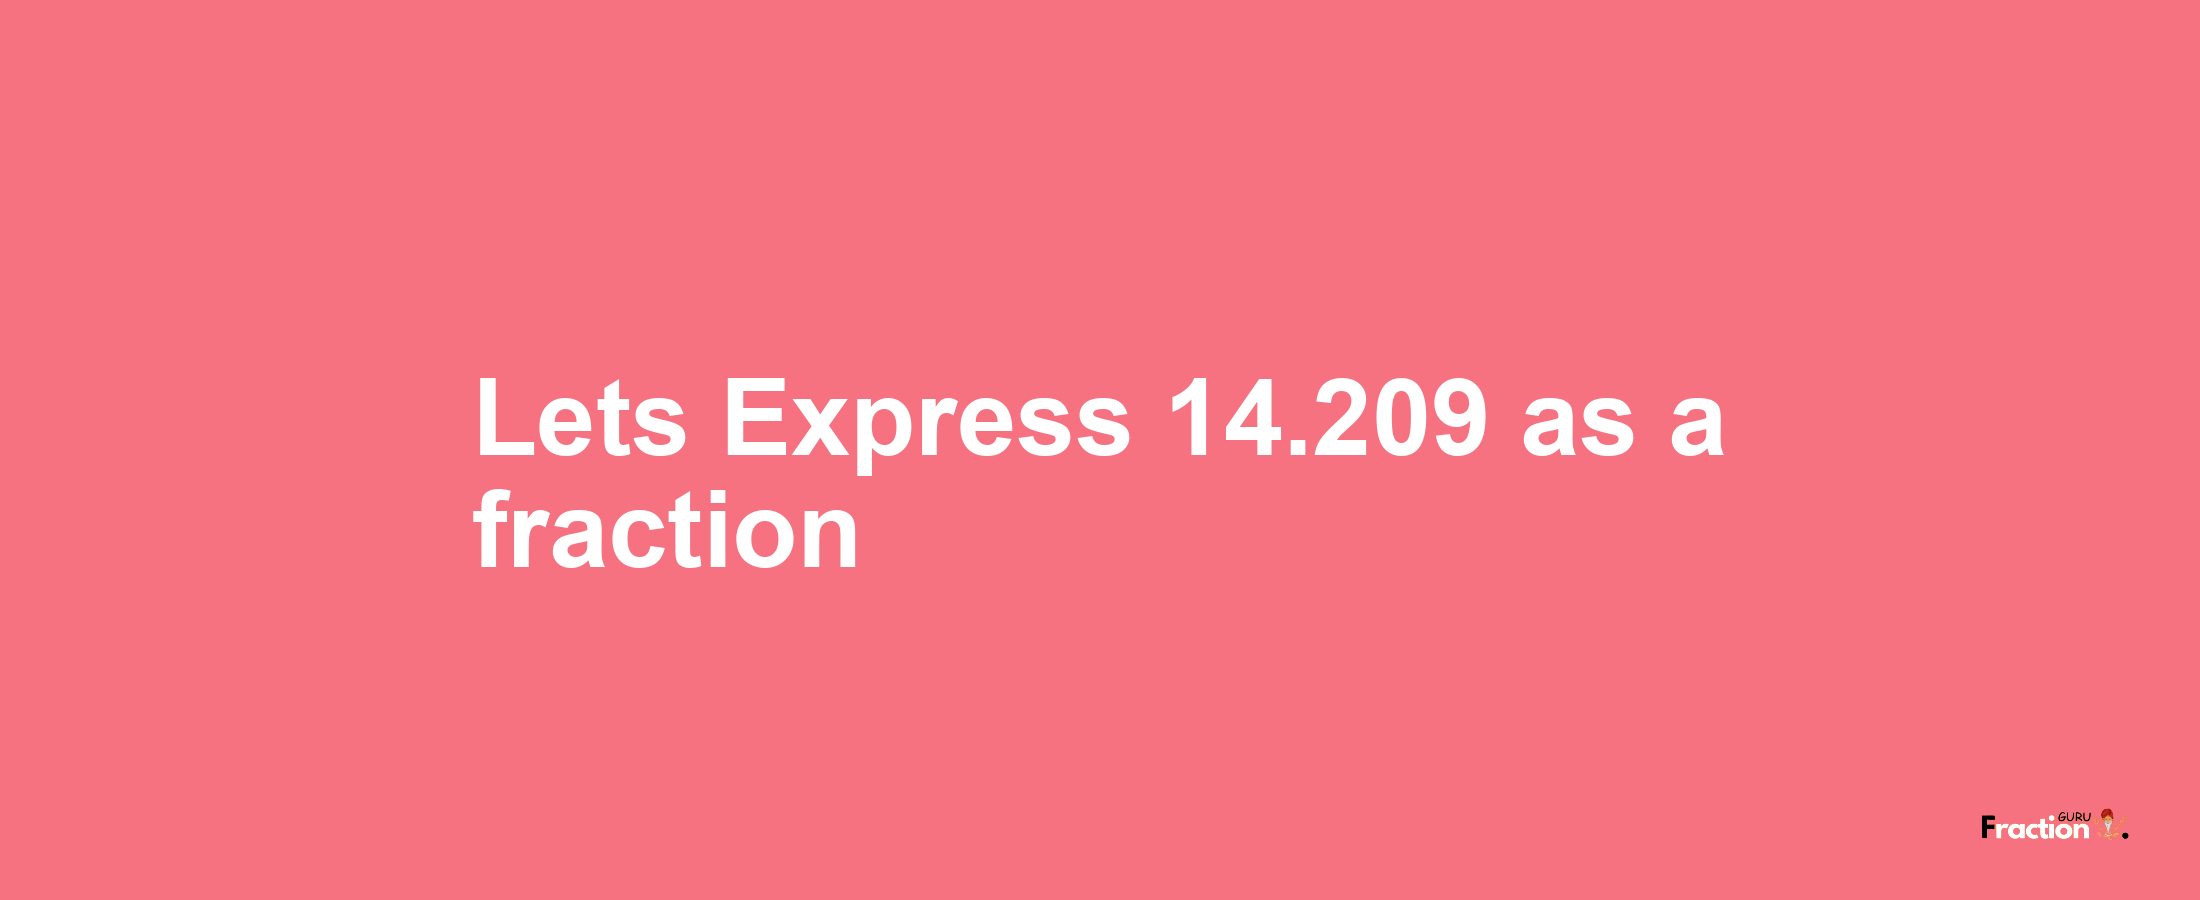 Lets Express 14.209 as afraction